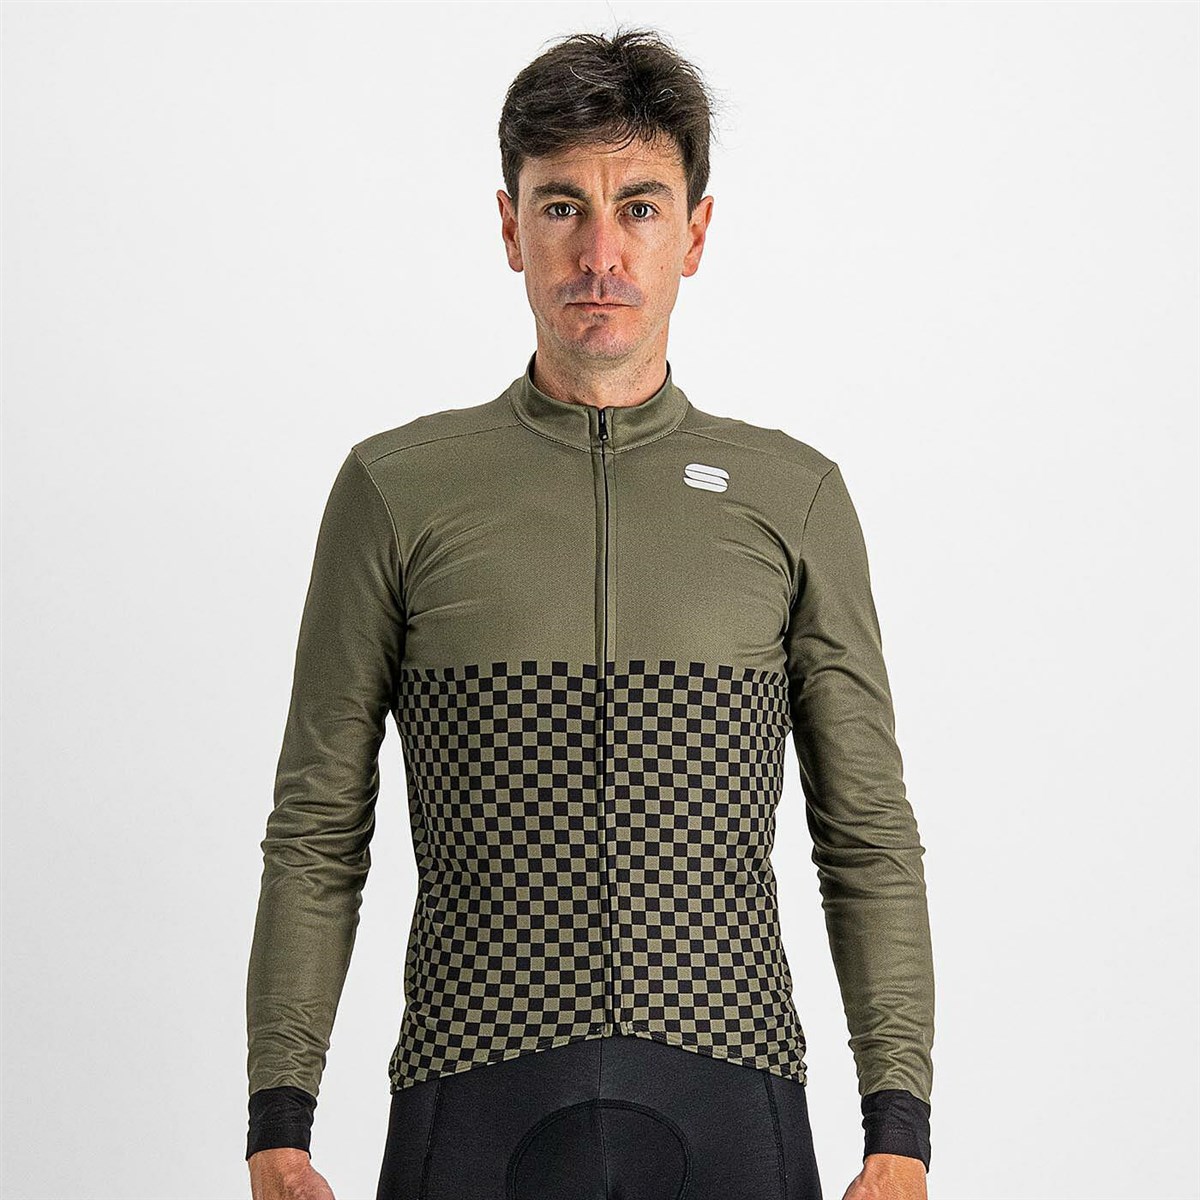 Sportful Checkmate Thermal Long Sleeve Jersey product image